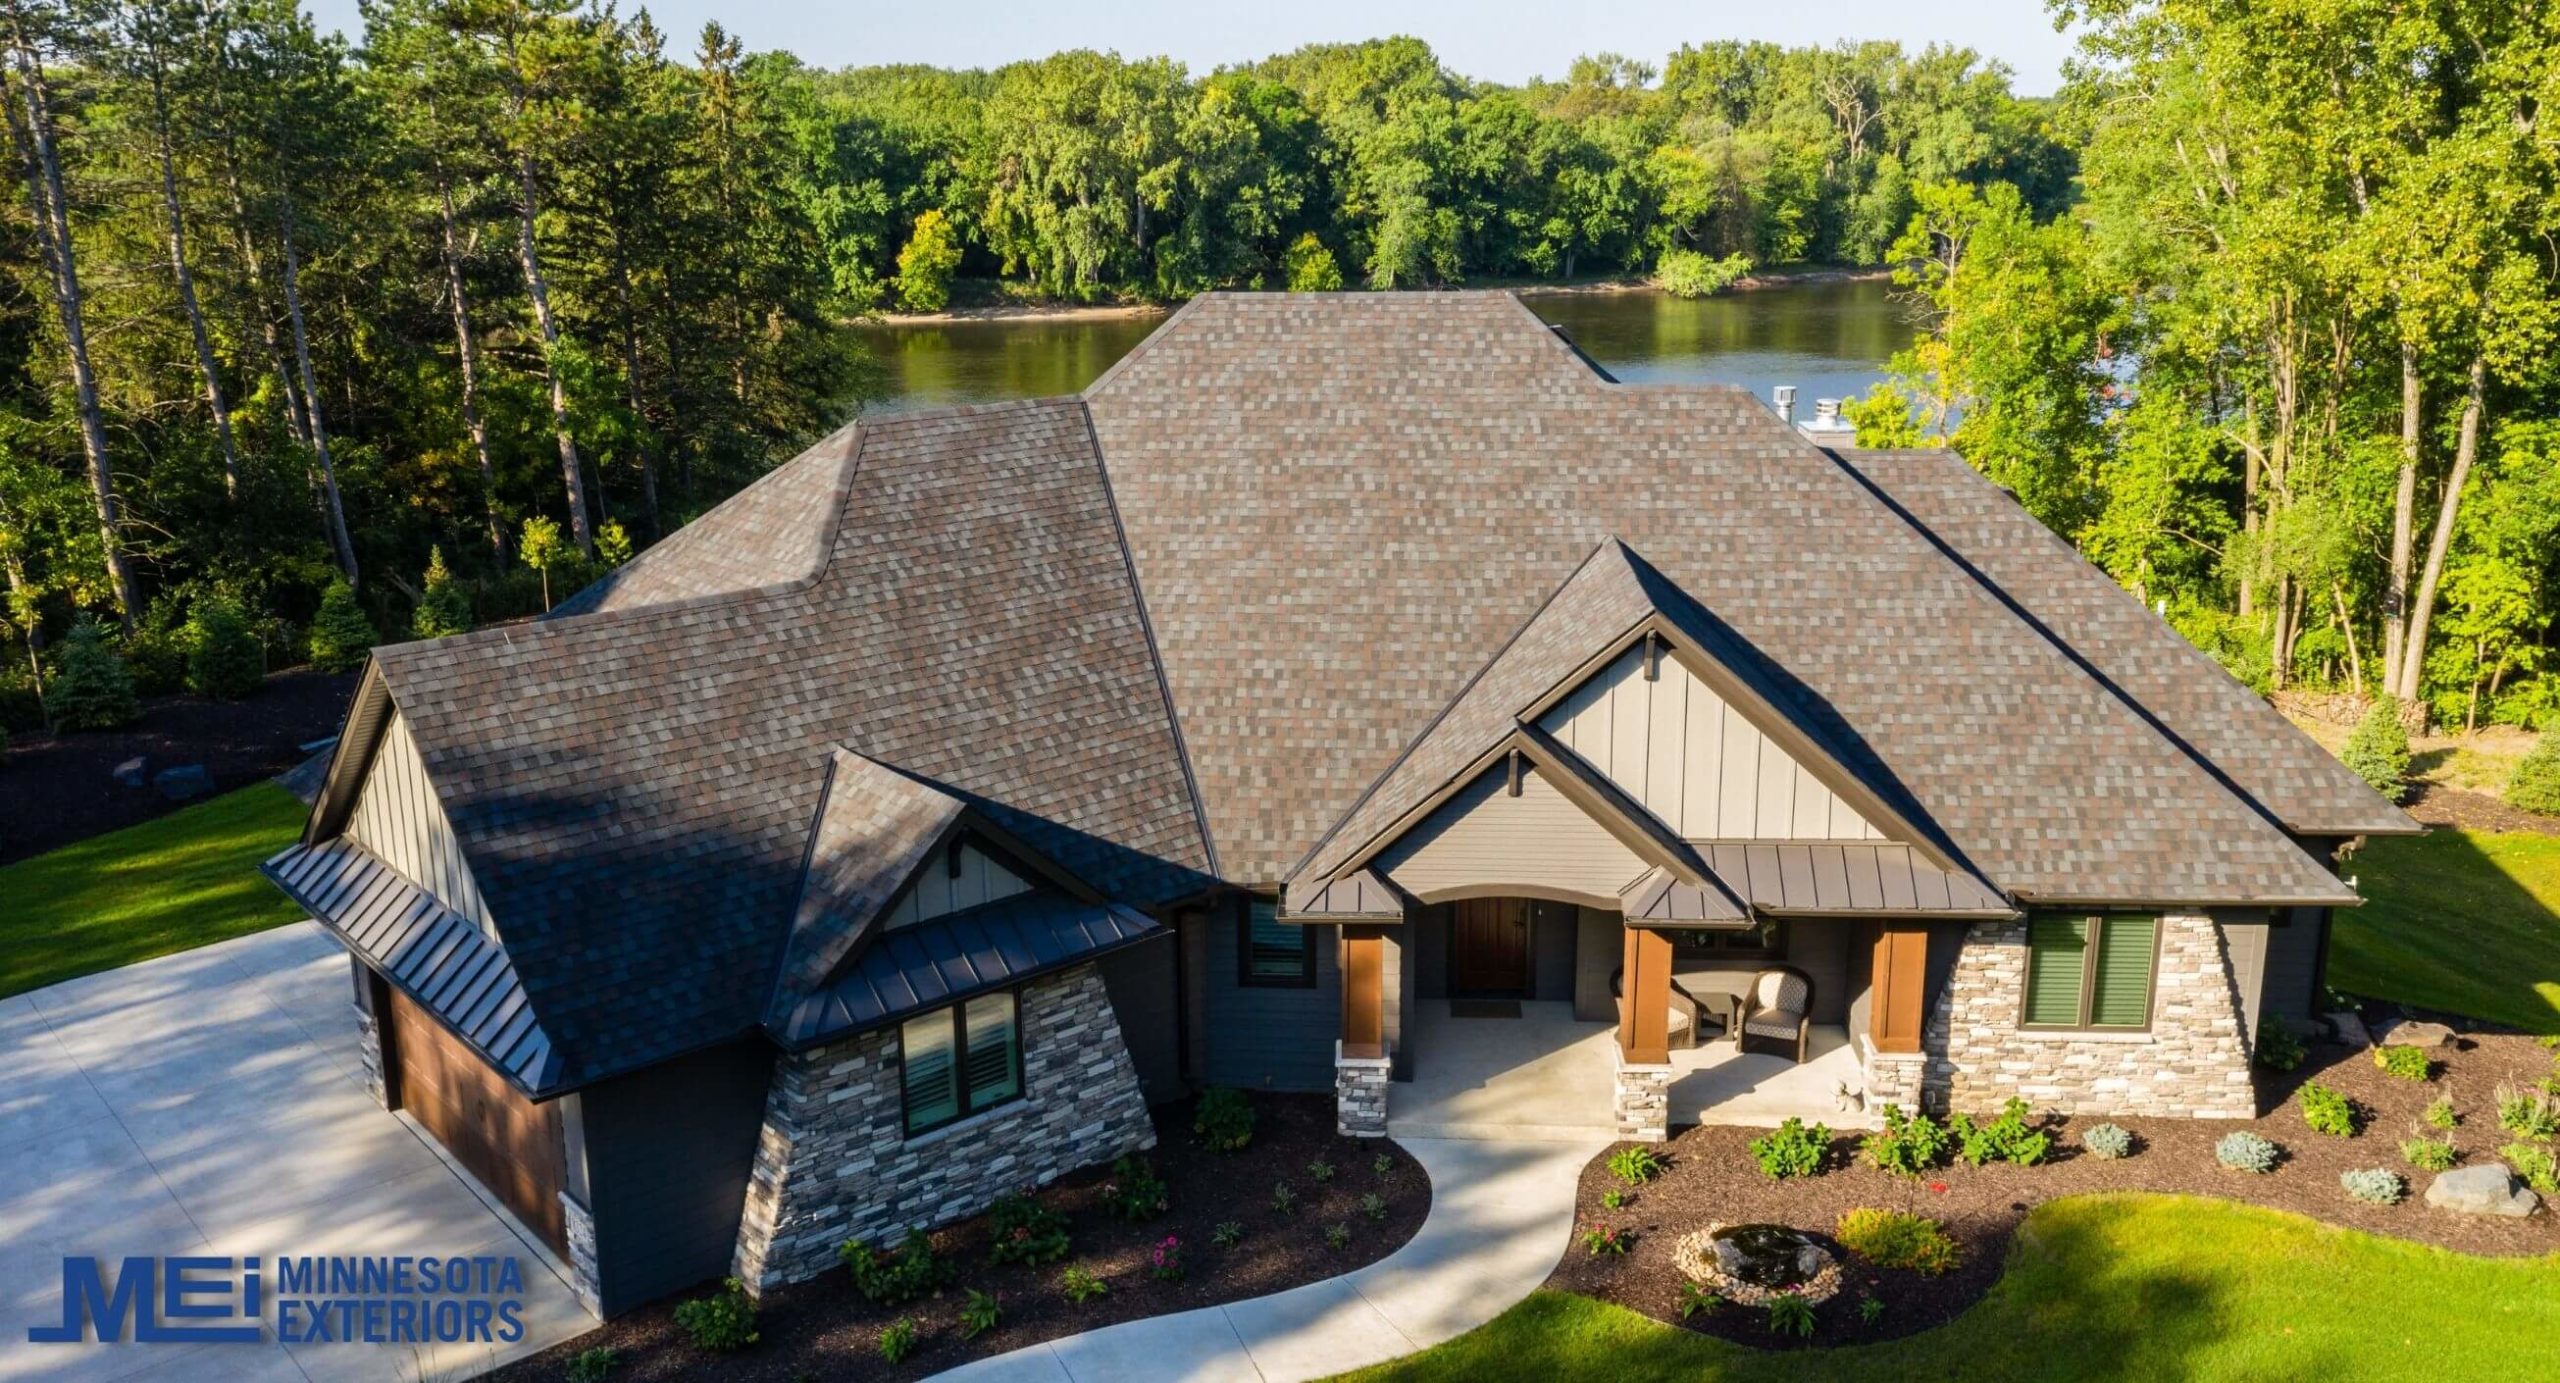 Lakeside home with patterned shingles